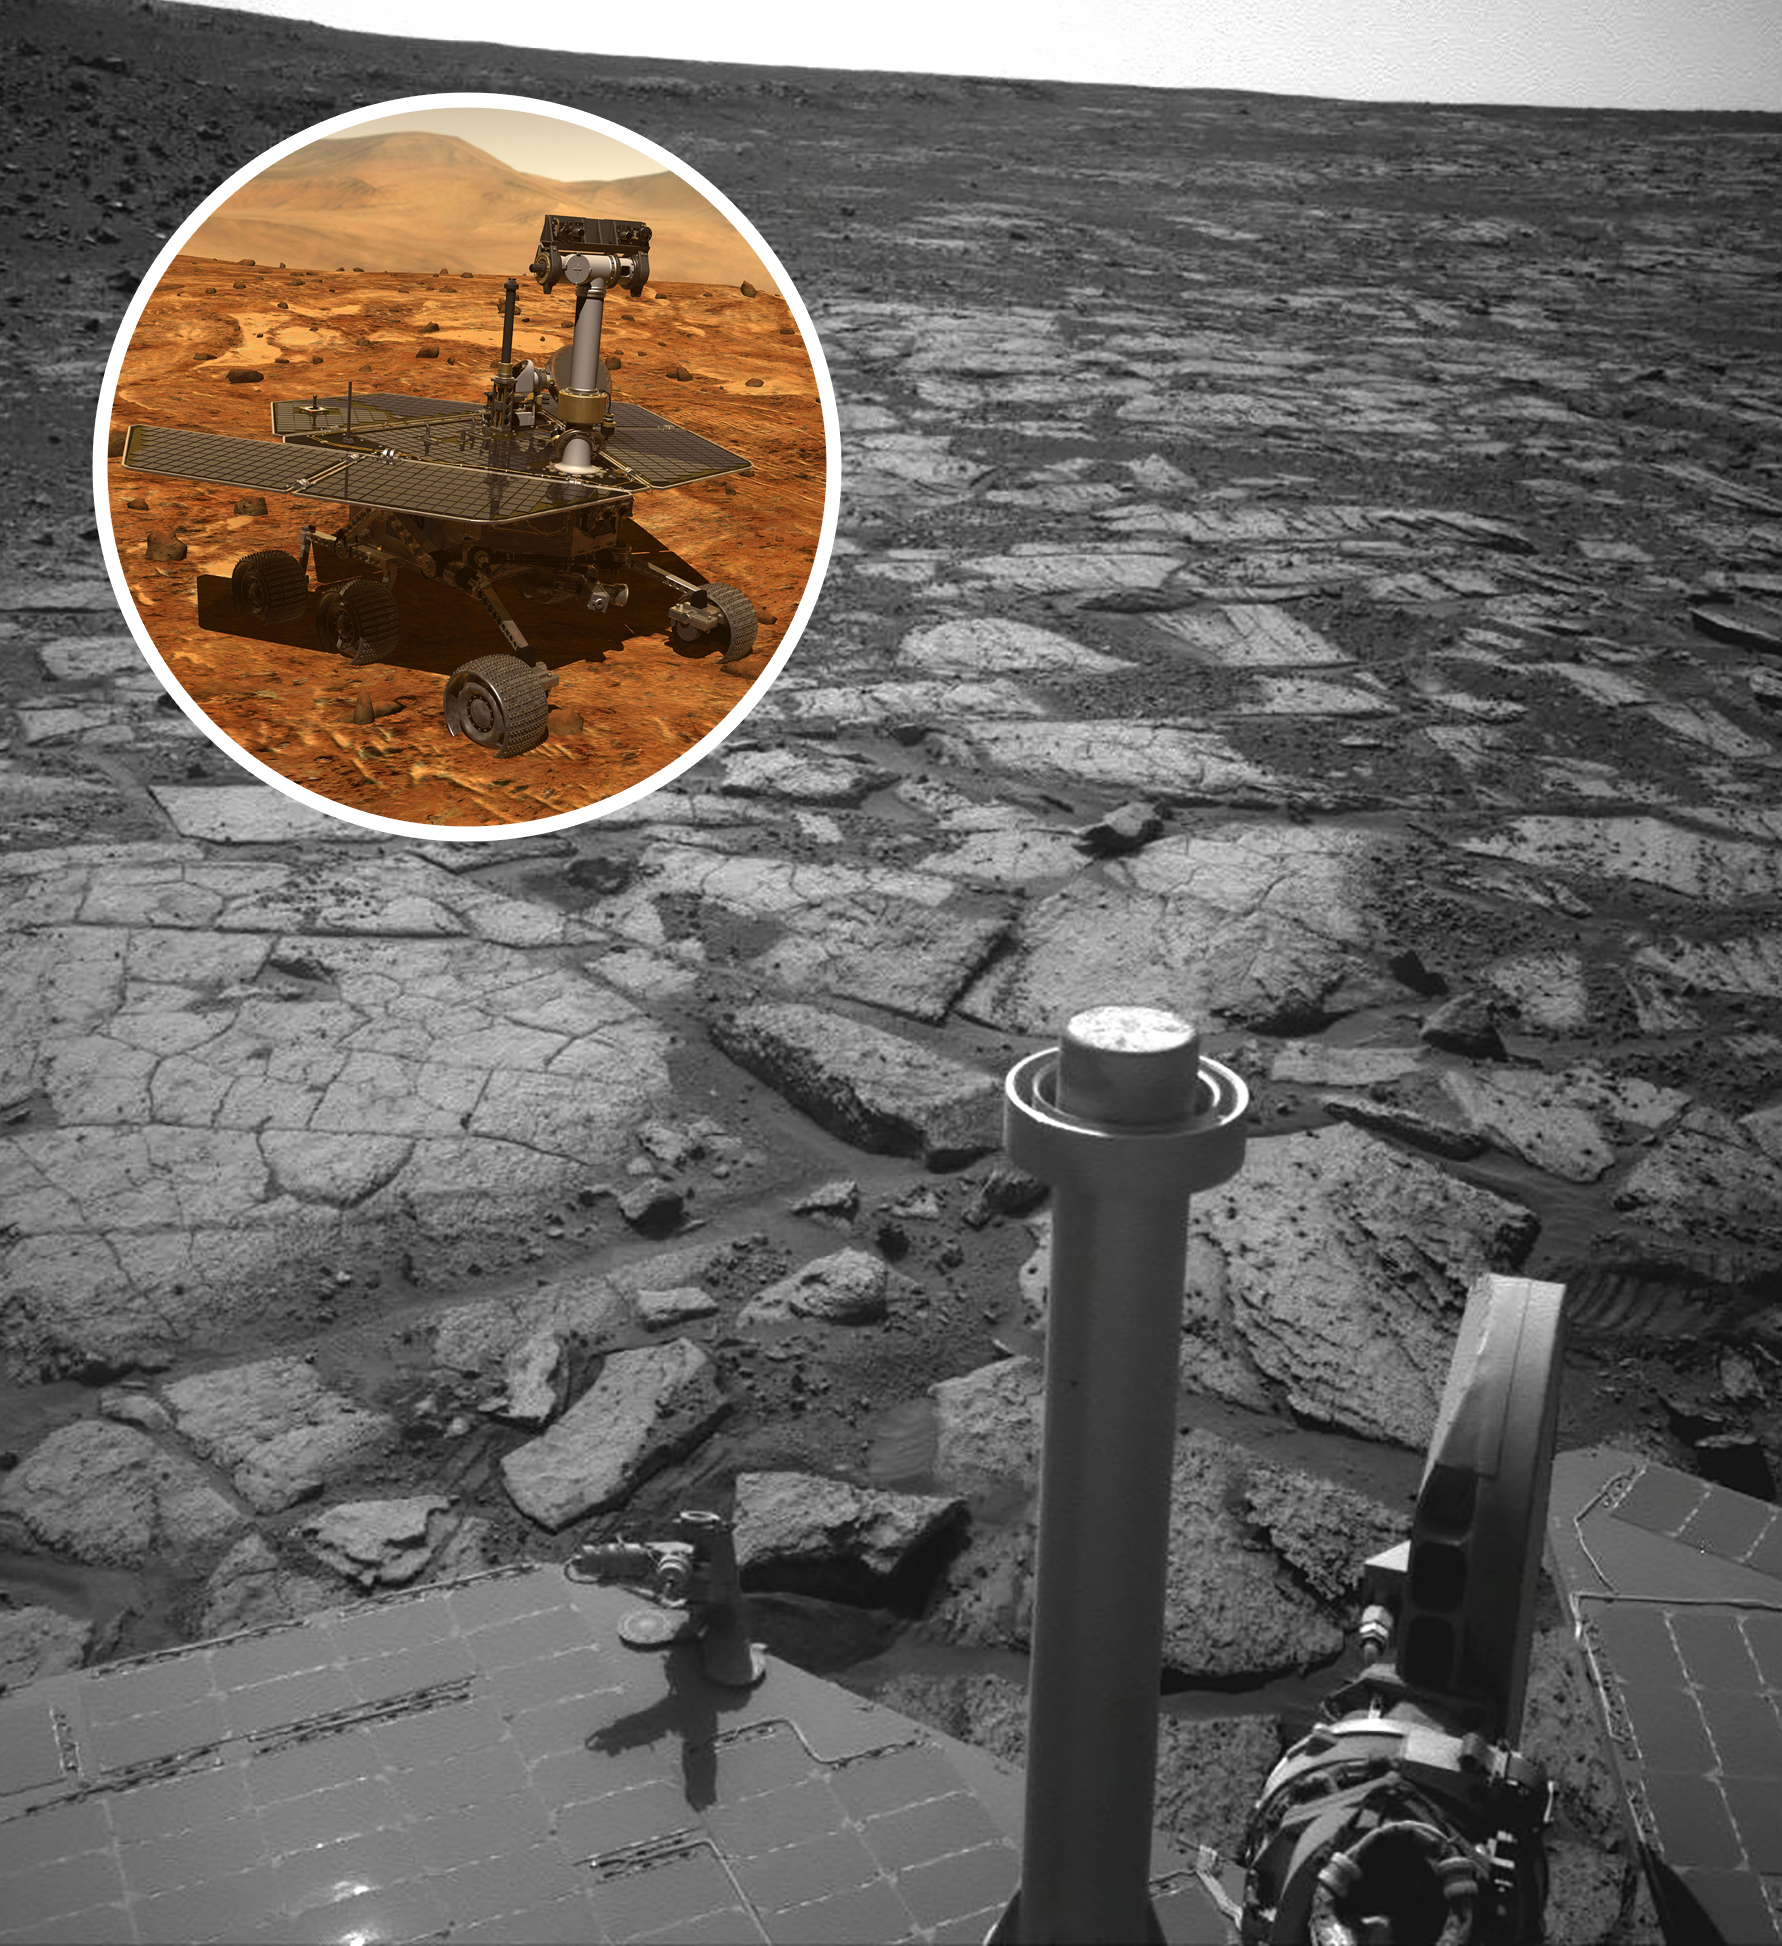 Opportunity’s Nav Camera took this photo on Sol 3391 (NASA/JPL-Caltech), with inset rendering of Opportunity (NASA/JPL-Caltech)